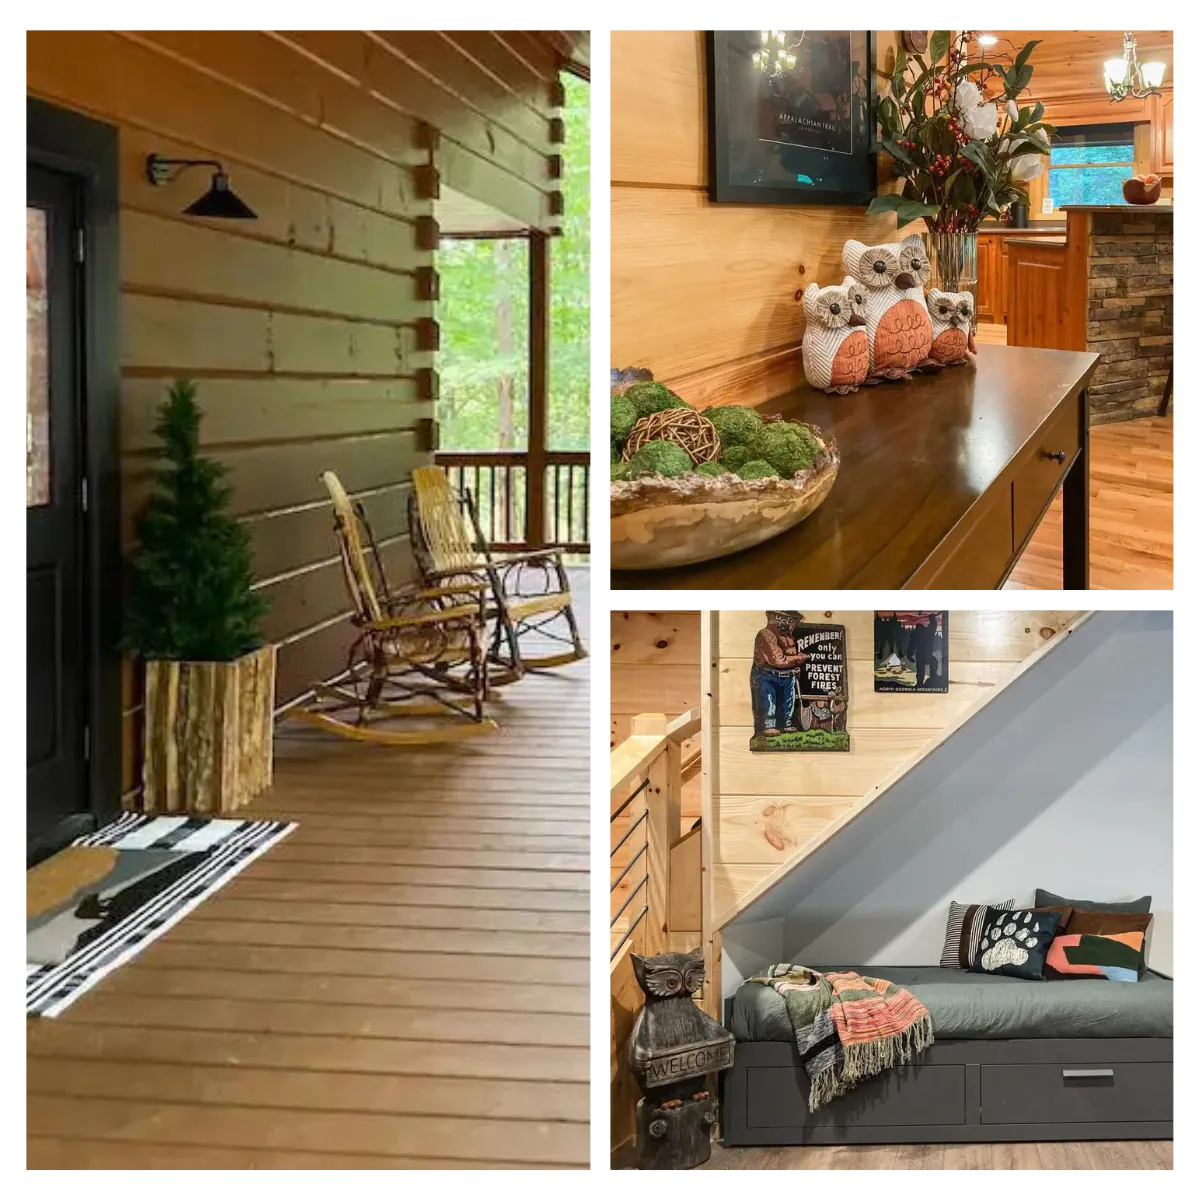 Visit Blissful Getaway, our cozy log cabin blending woodland charm with modern comforts for a serene and joyful retreat. Experience the allure of nature indoors with added modern conveniences, all at your command with Alexa.